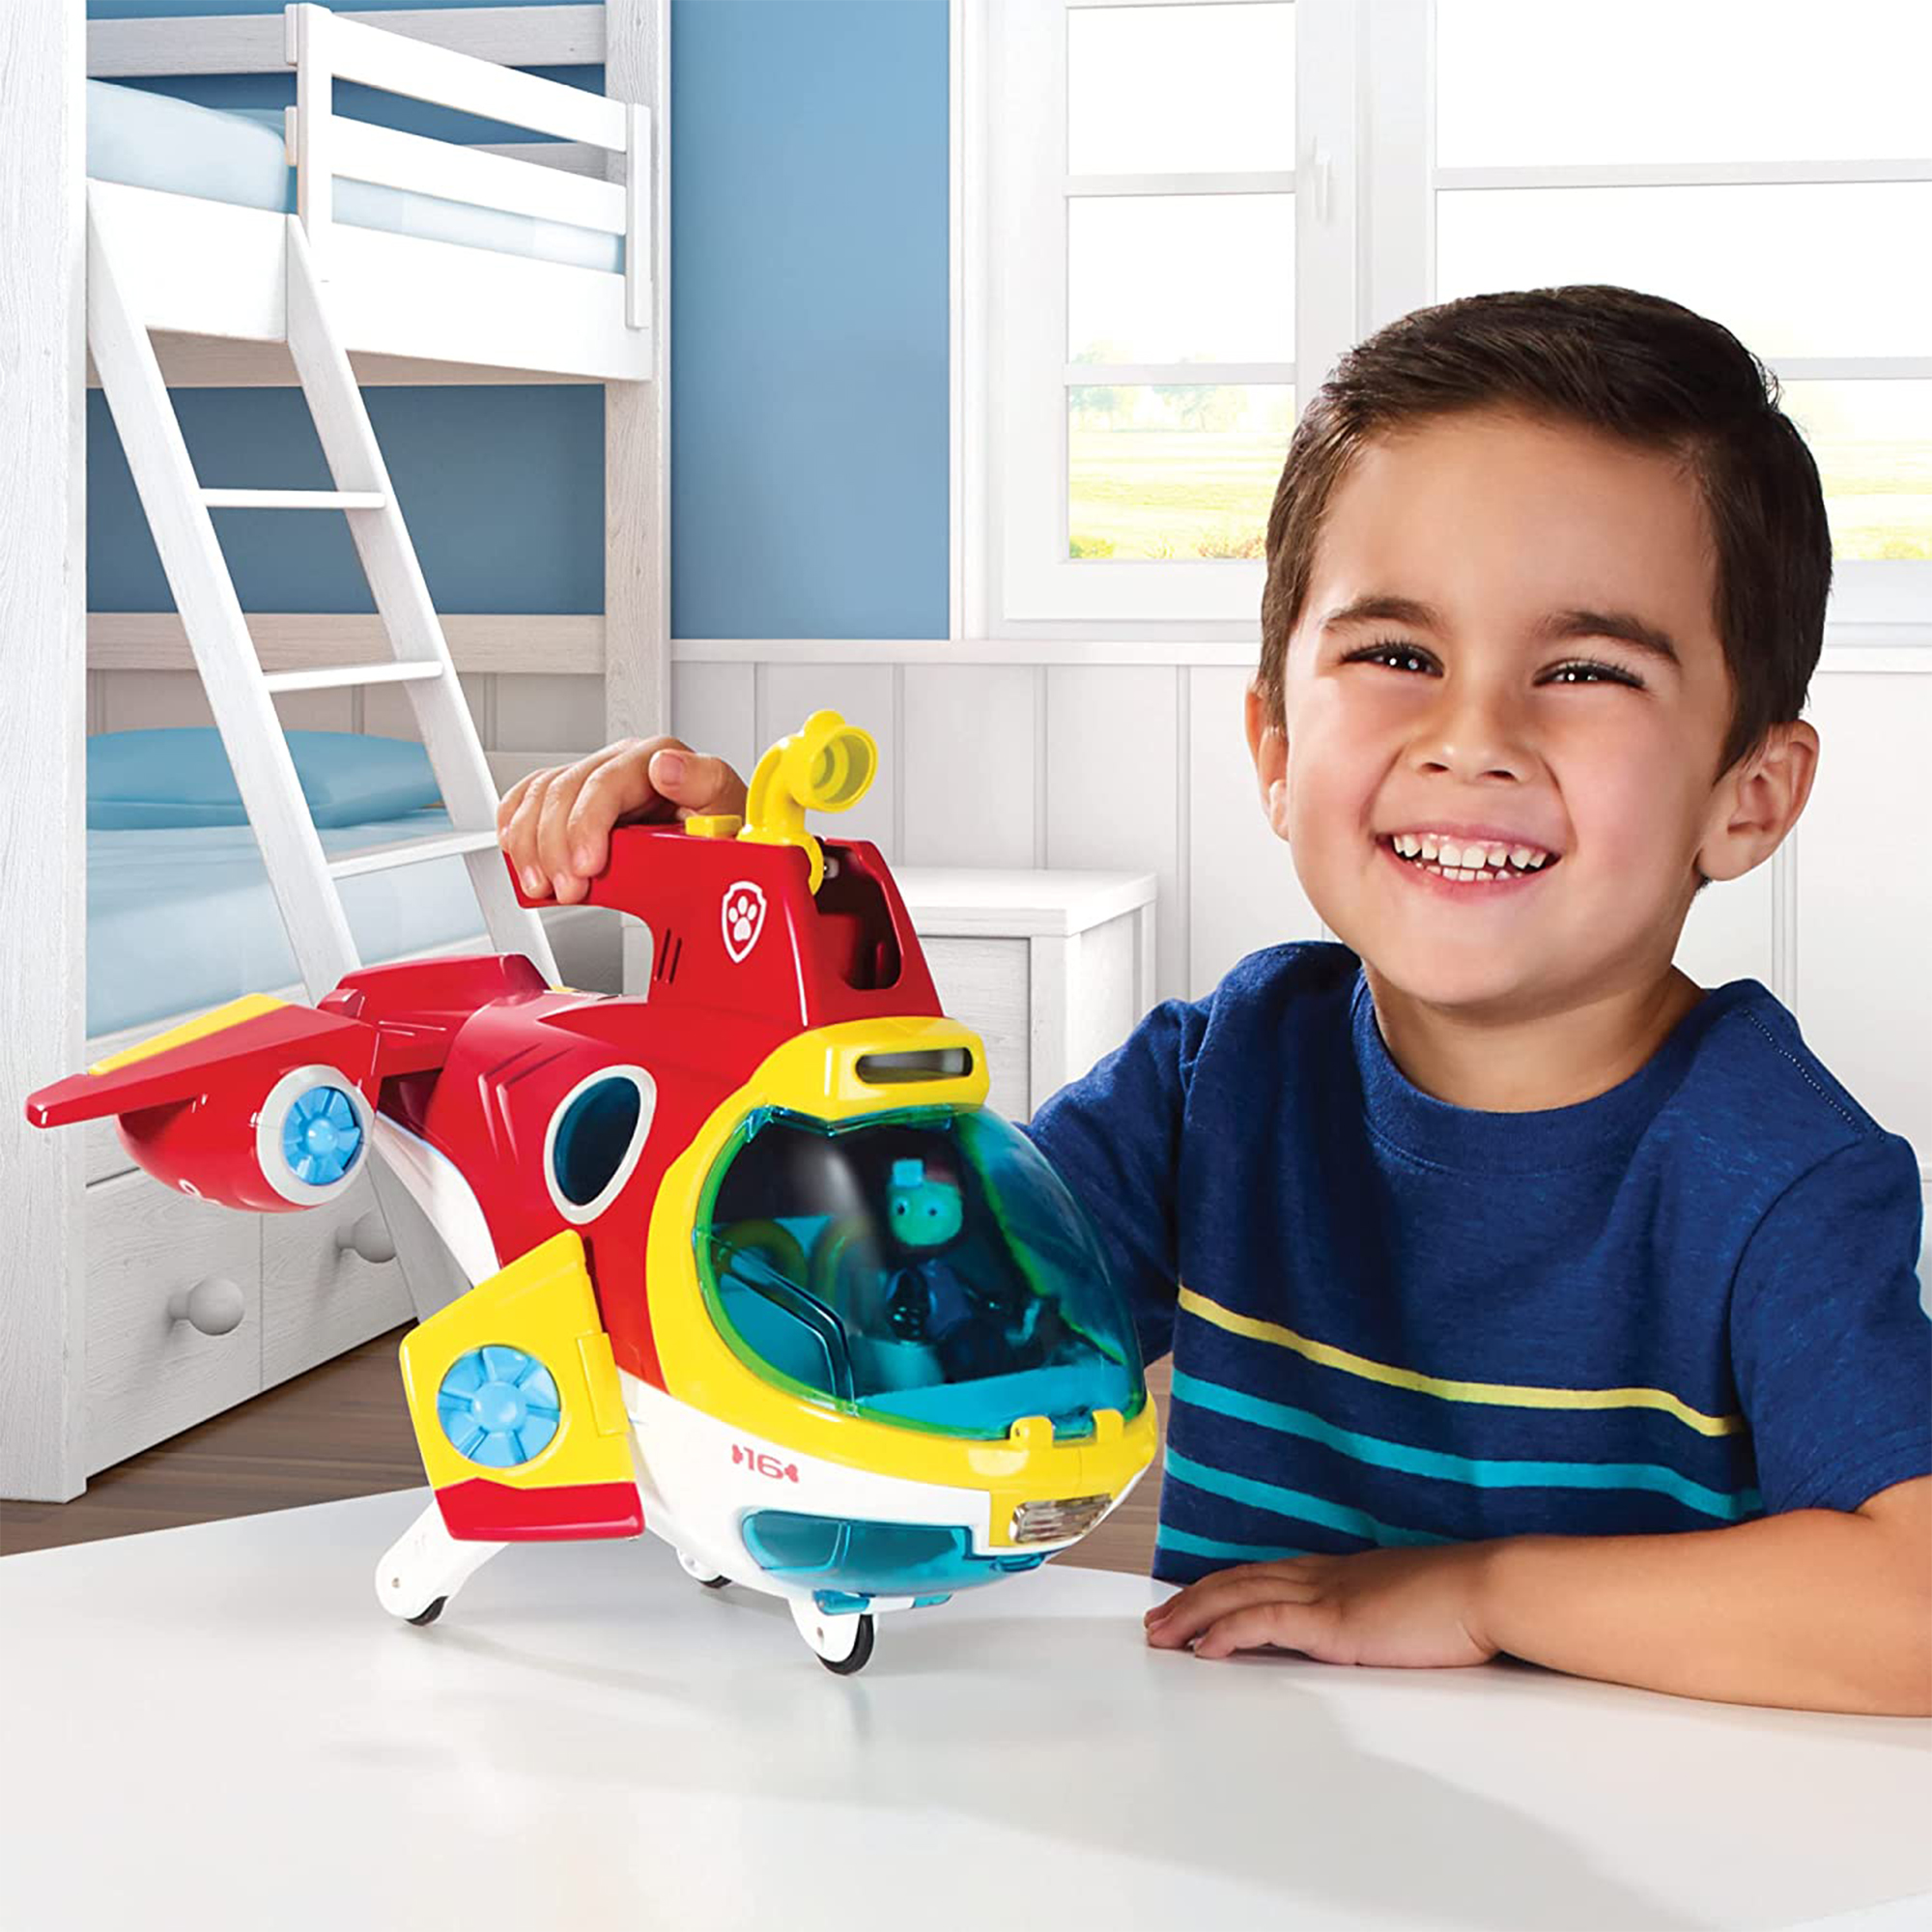 Paw Patrol Sub Patroller Air to Sea Vehicle with Lights, Sounds & Launcher - image 7 of 8